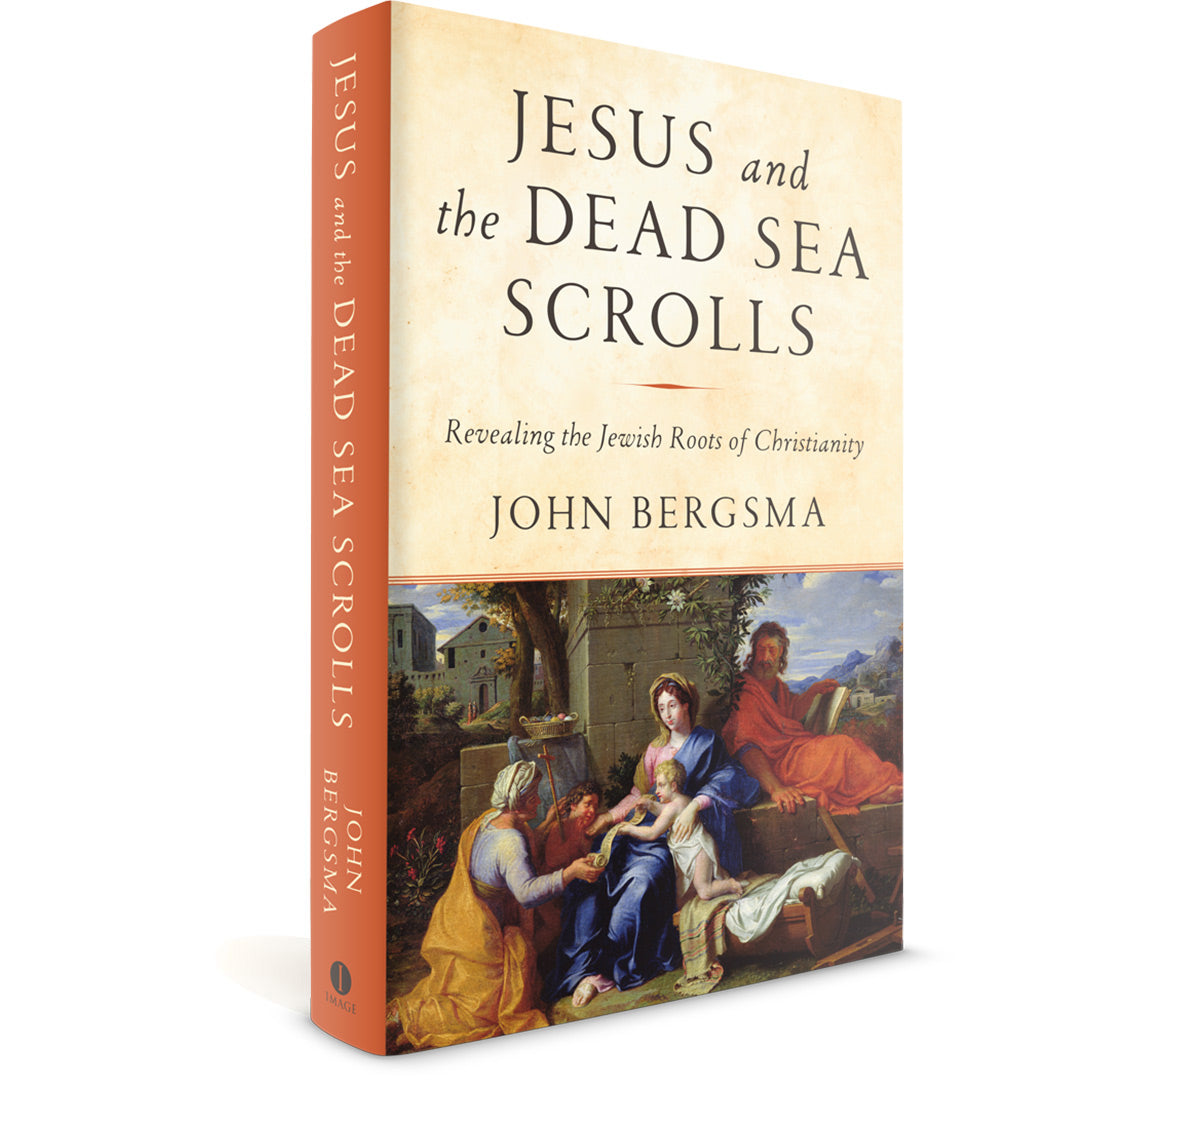 Jesus and the Dead Sea Scrolls: Revealing the Jewish Roots of Christianity (Signed by Dr. Bergsma)